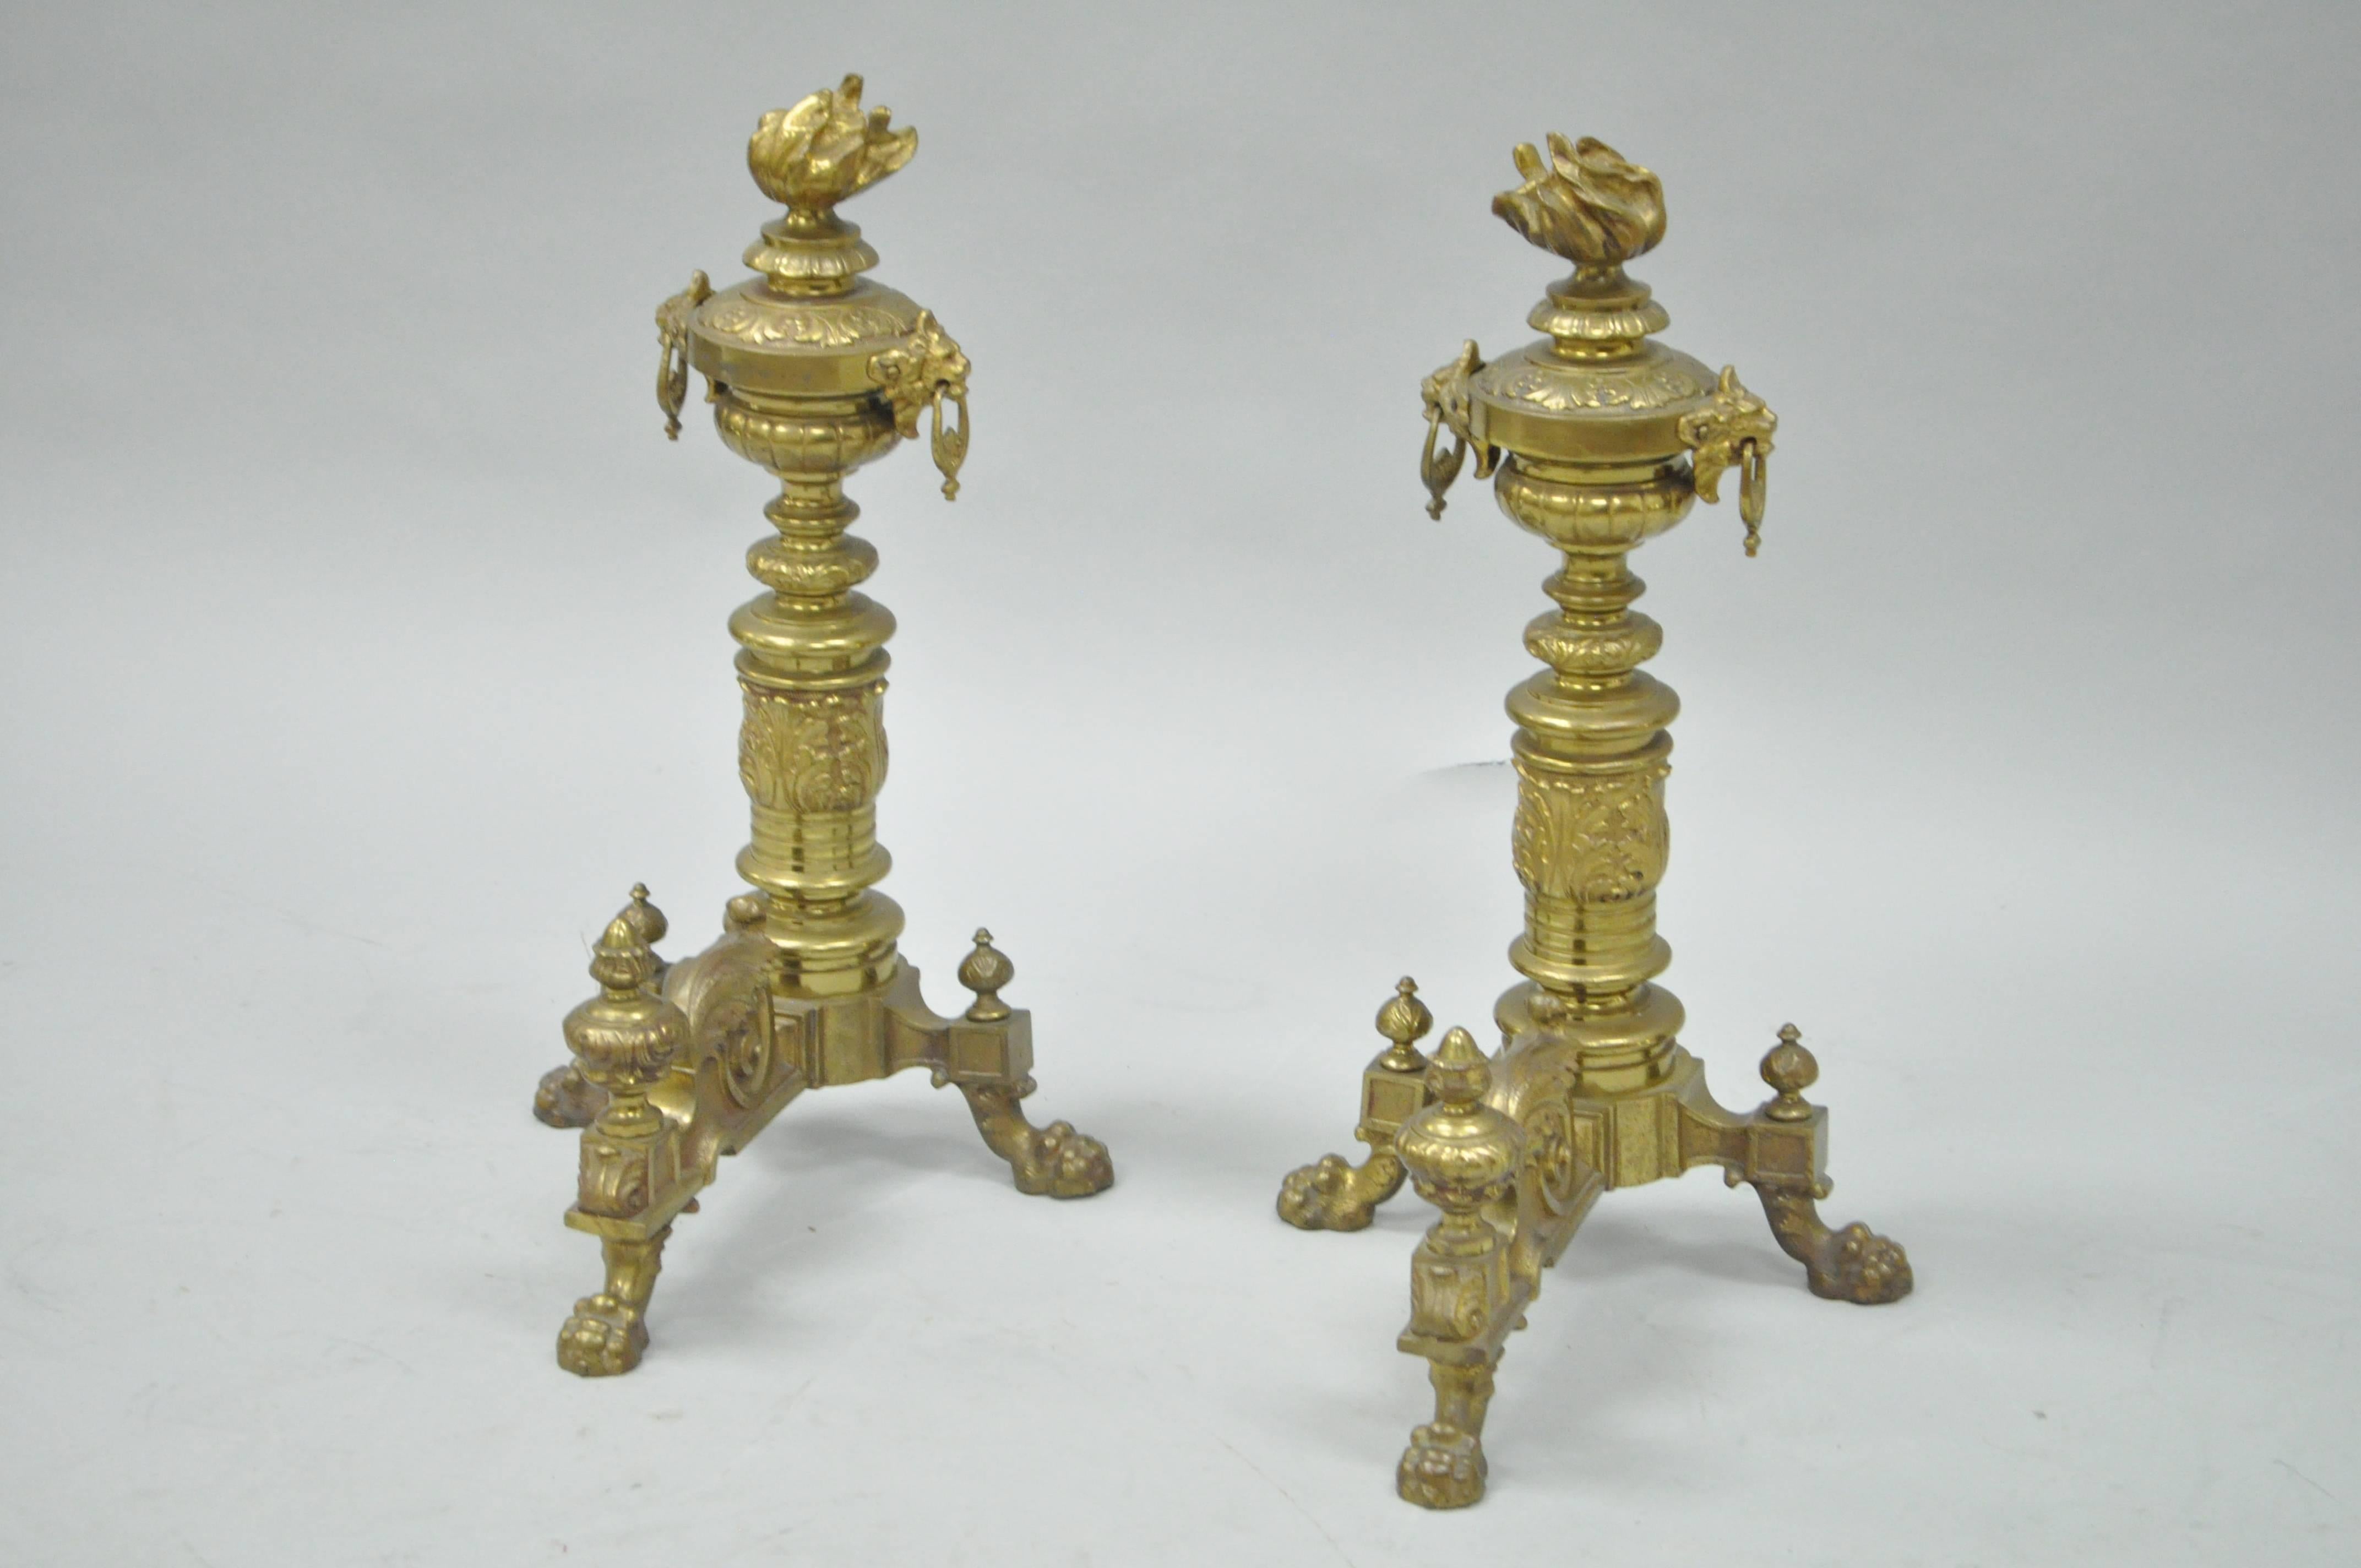 Cast Pair of 19th C. French Empire Neoclassical Flame & Lion Brass Paw Andirons & Bar For Sale